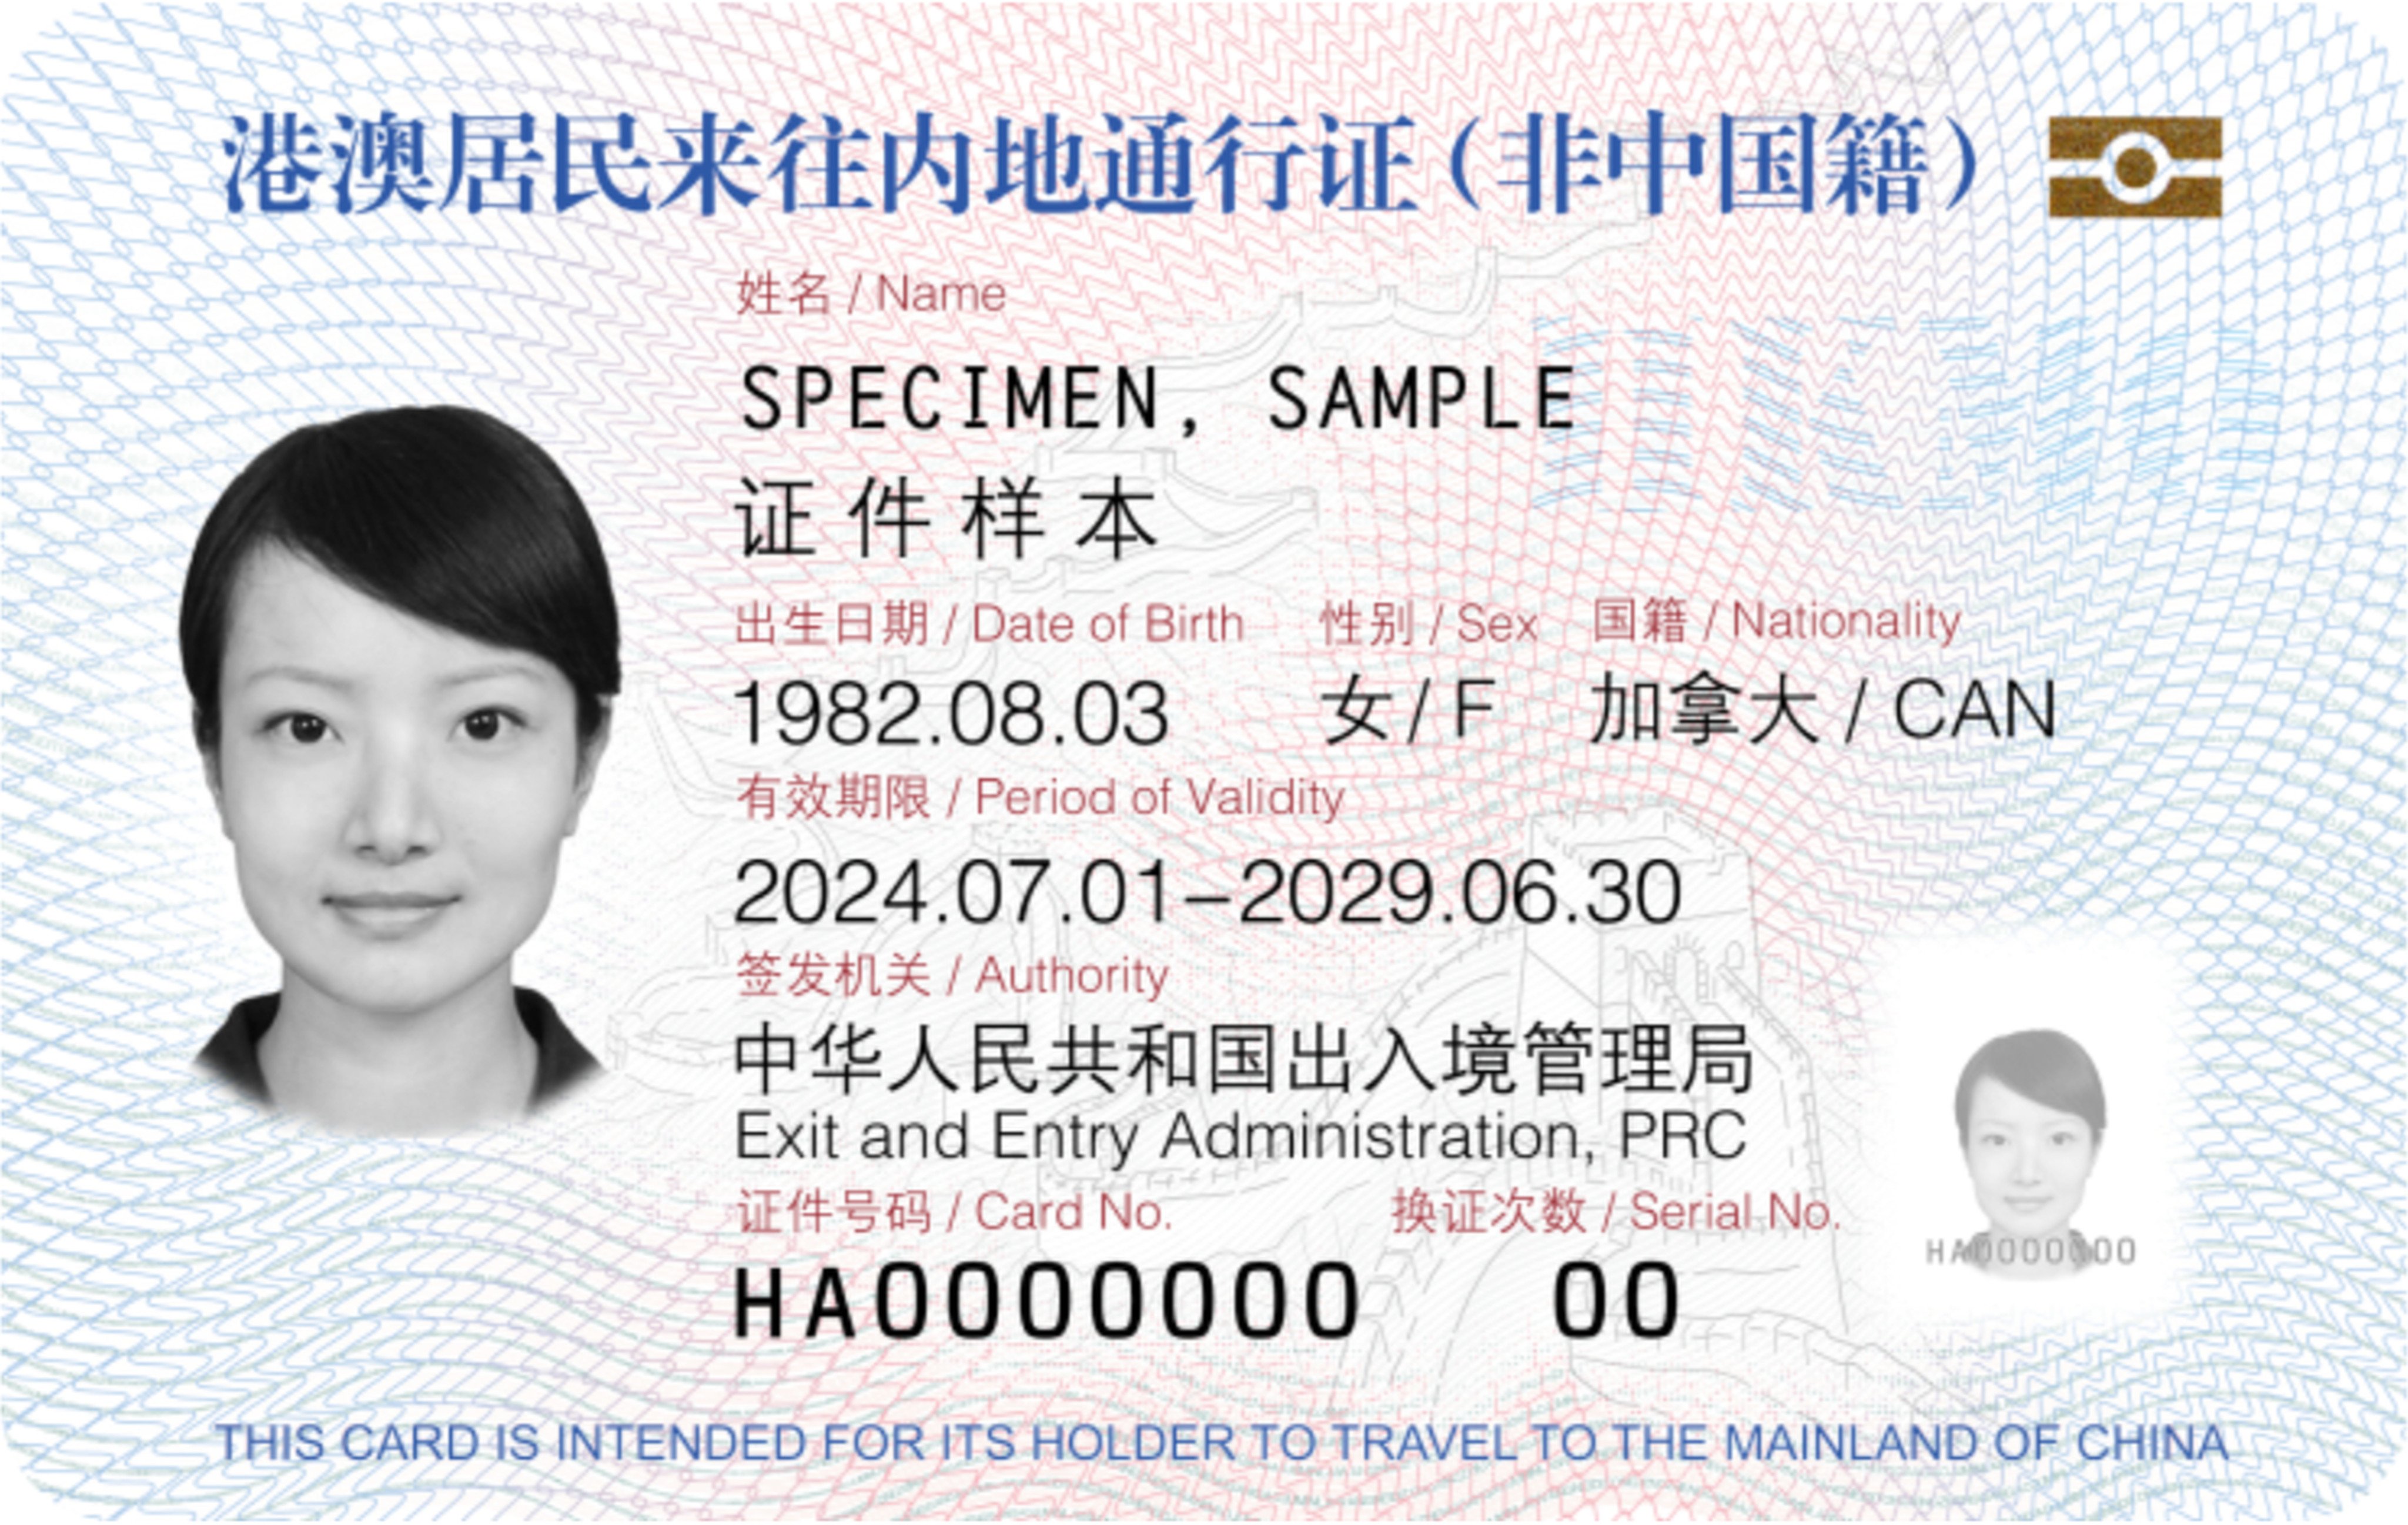 Non-Chinese nationals with permanent residency in Hong Kong can apply for five-year travel permits to enter the mainland from July 10. Photo: Exit and Entry Administration